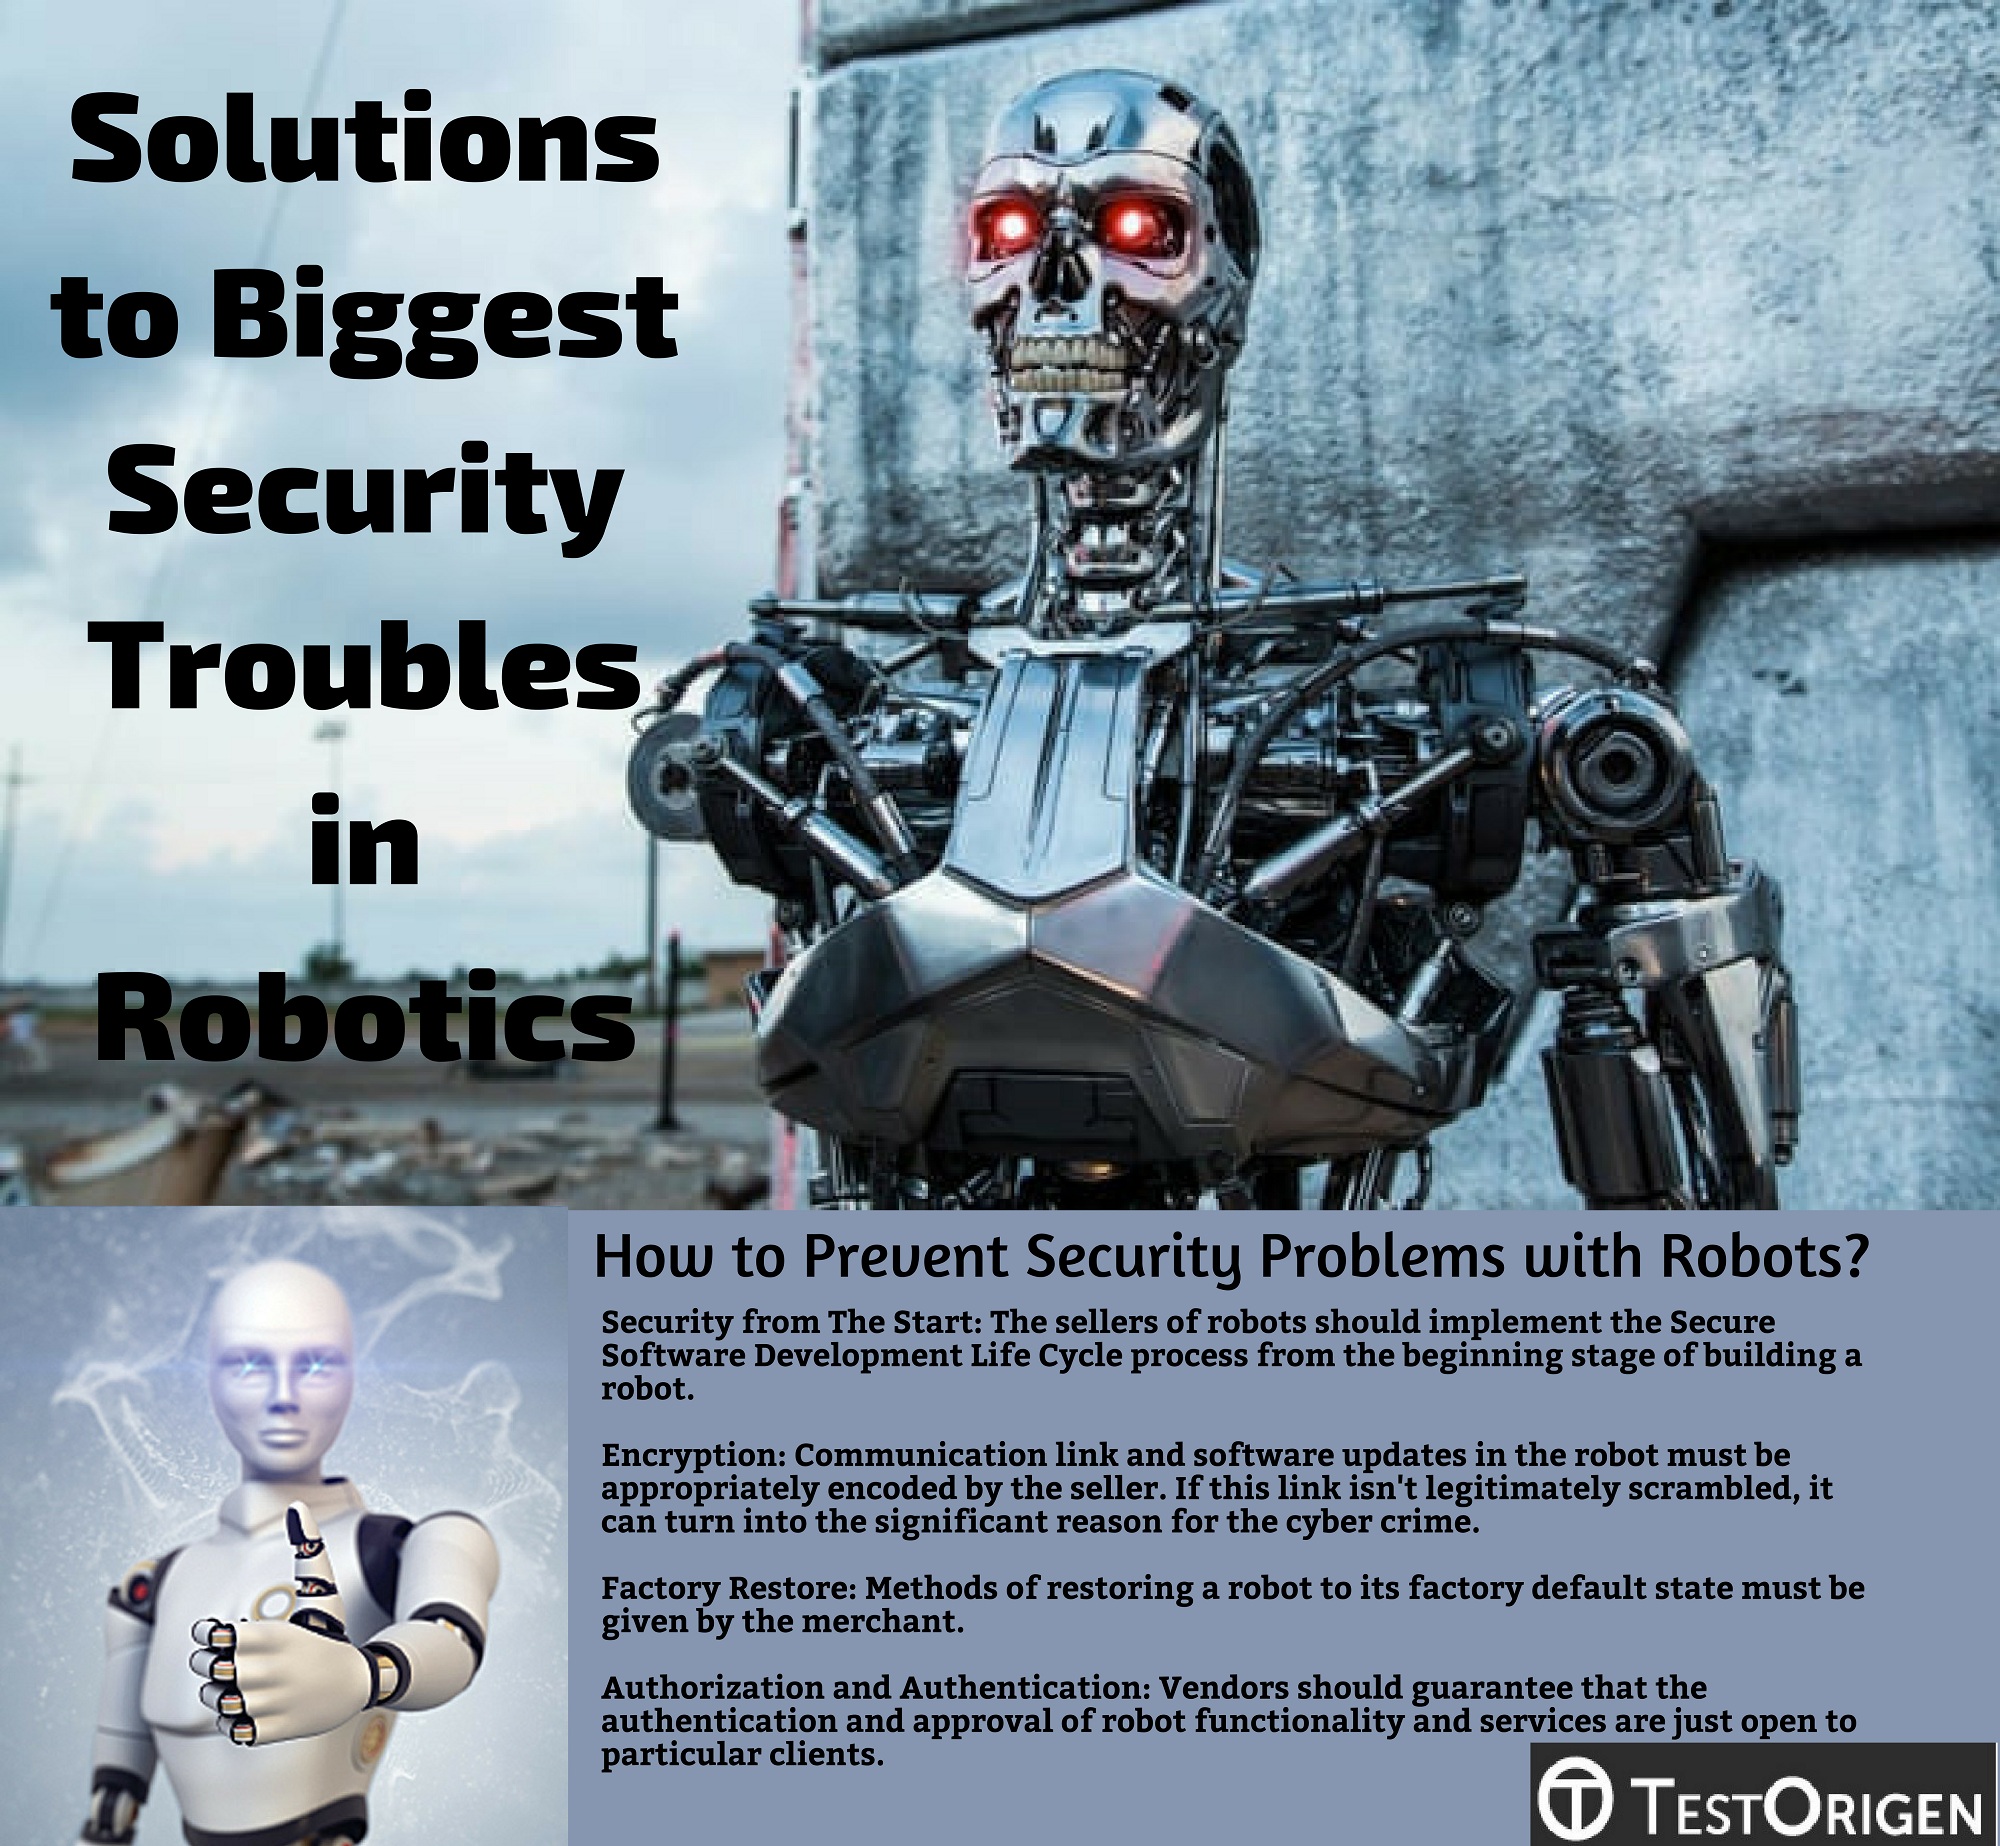 Solutions to Biggest Security Troubles in Robotics